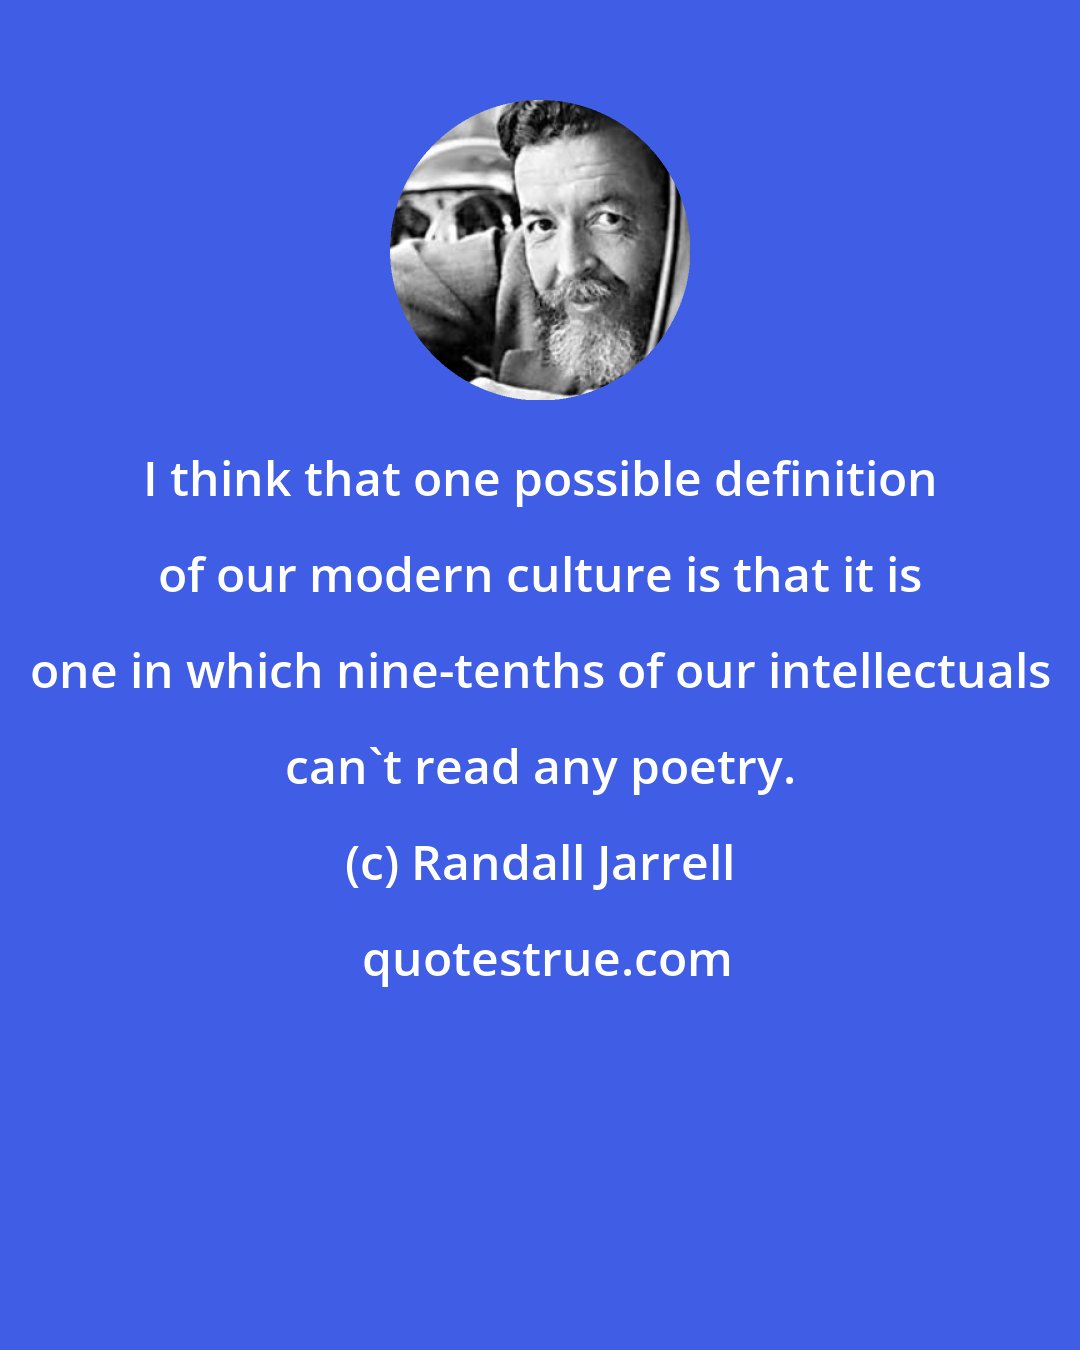 Randall Jarrell: I think that one possible definition of our modern culture is that it is one in which nine-tenths of our intellectuals can't read any poetry.